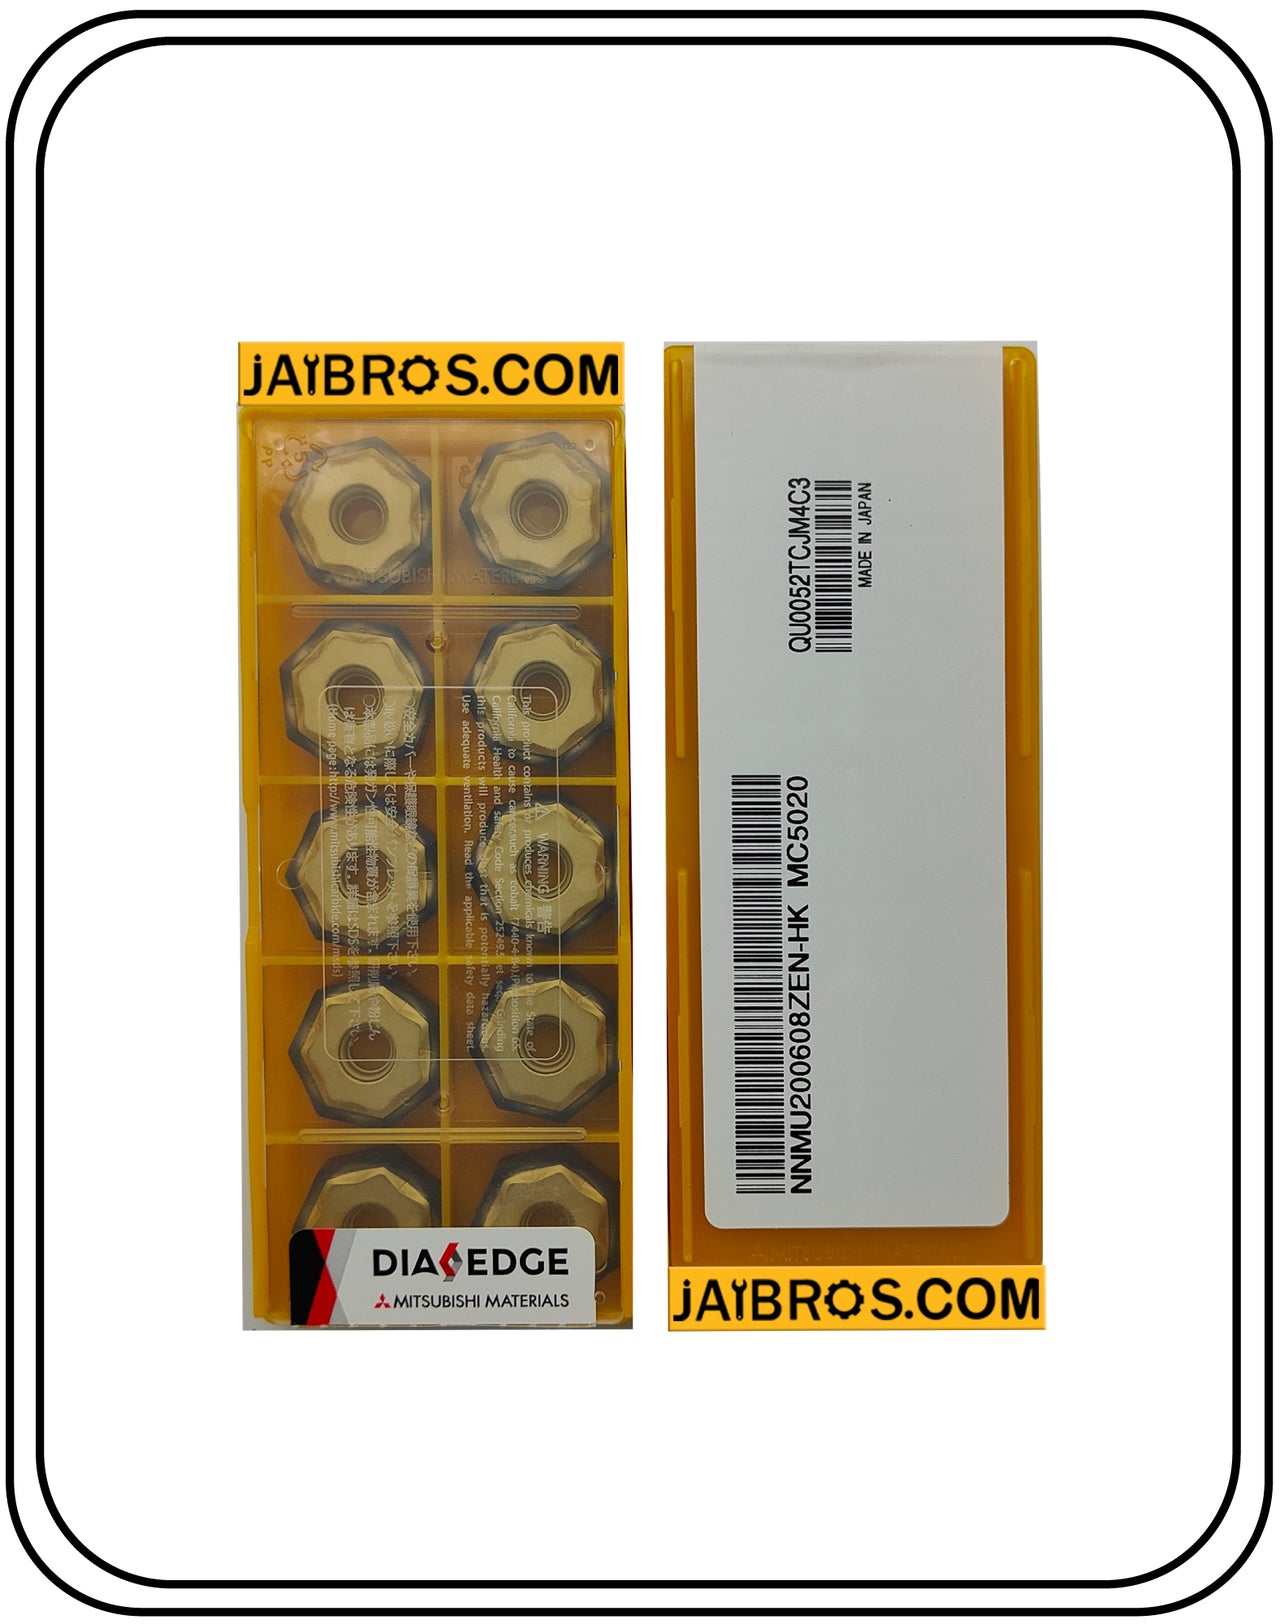 Mitsubishi NNMU200608ZEN HK MC5020 pack of 50 pcs(AGAINST PREAPAID ORDER ONLY)